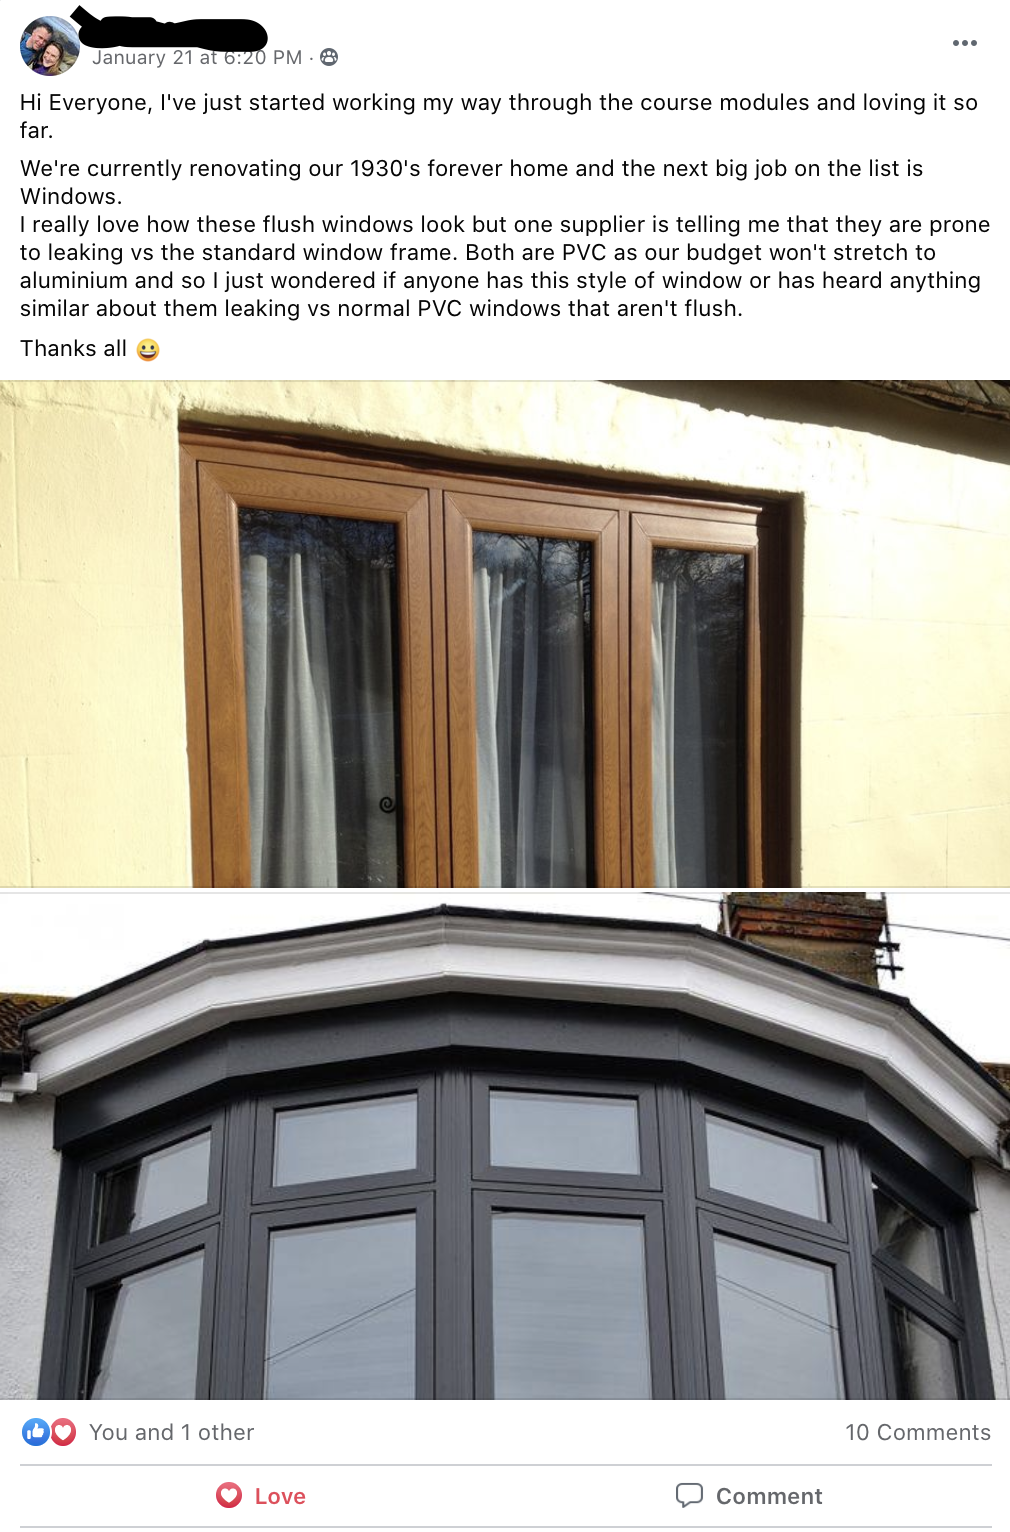 A post detailing windows in a window renovation